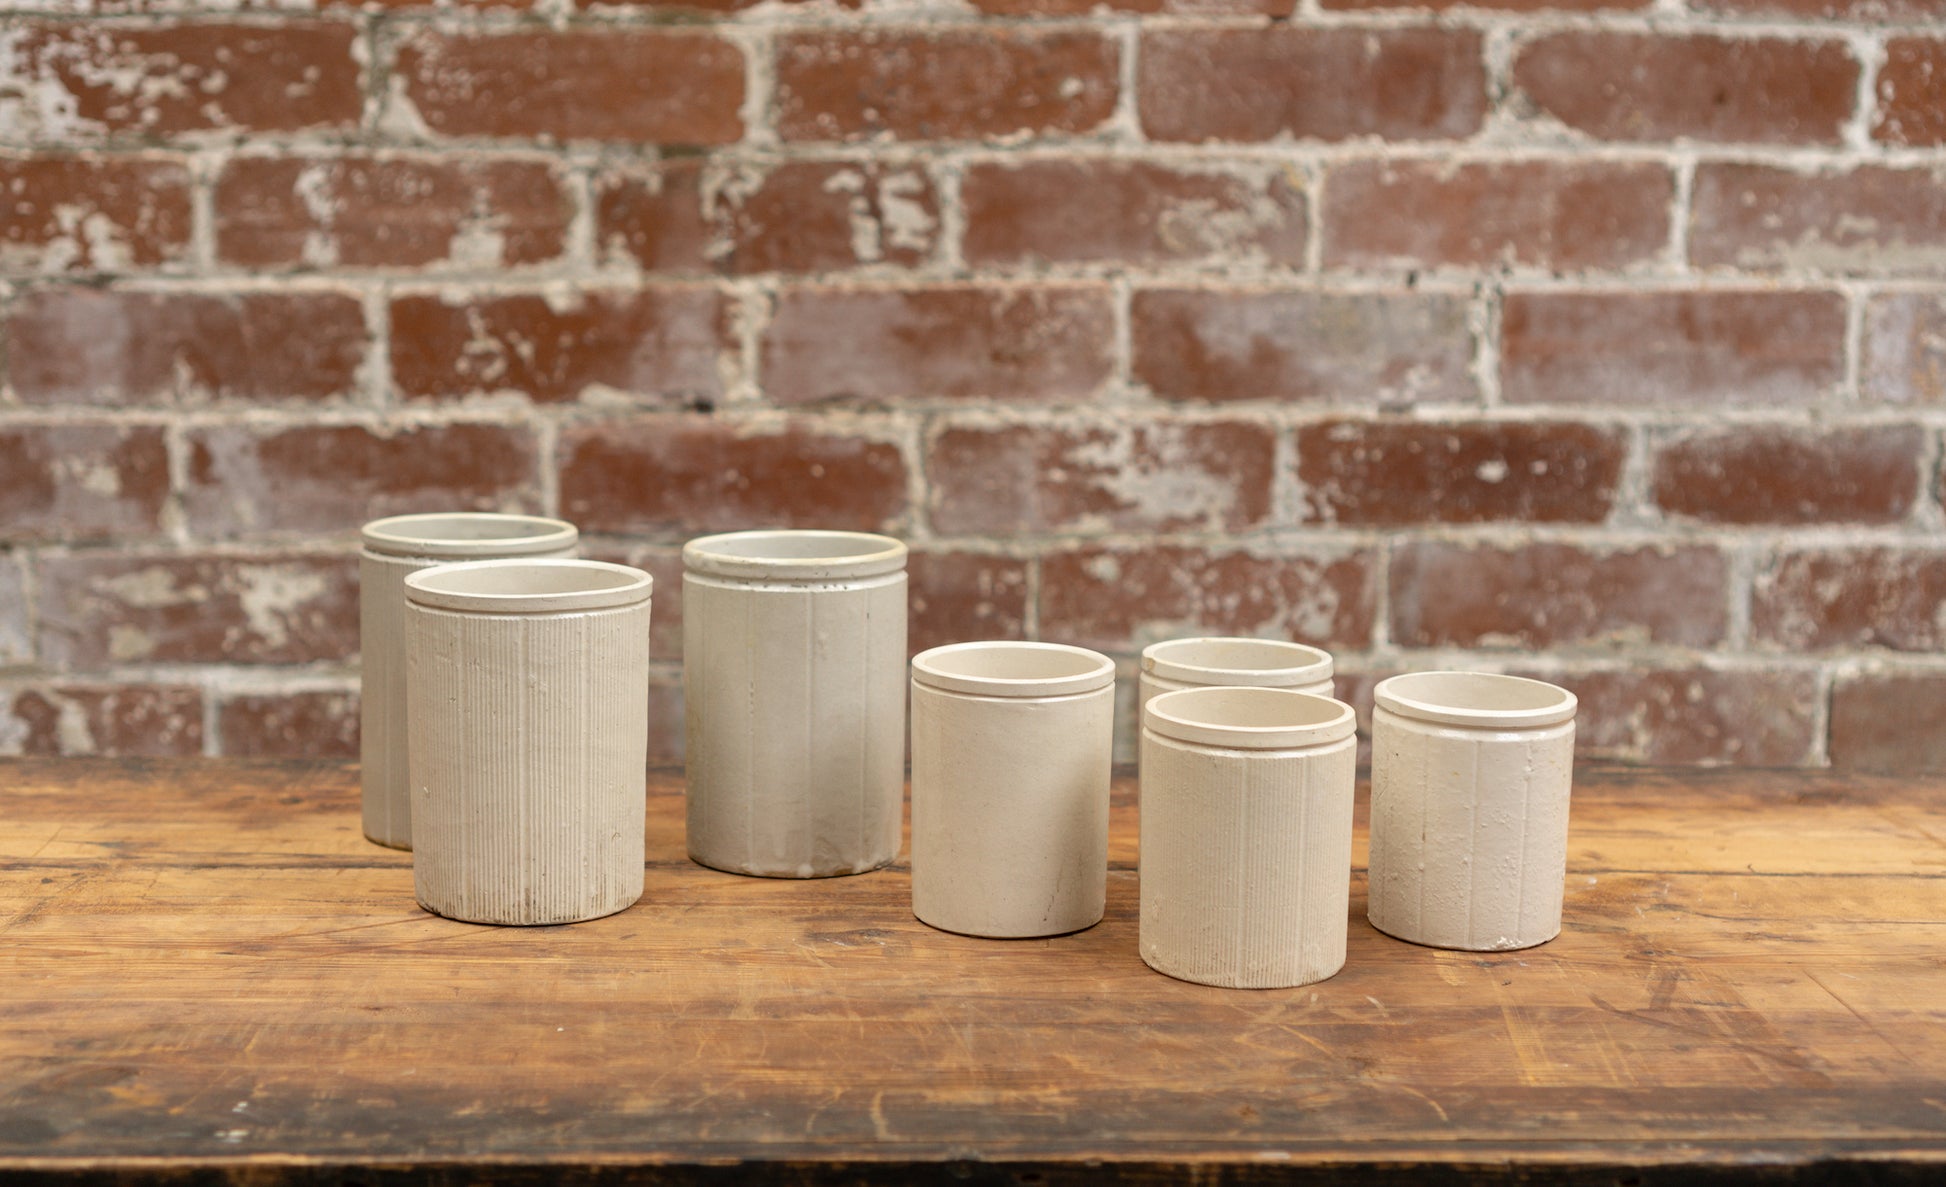 Photo shows 6 various sized salvaged Victorian stoneware jam conserve jars against a brick wall background. The jars are cream coloured with a glaze.